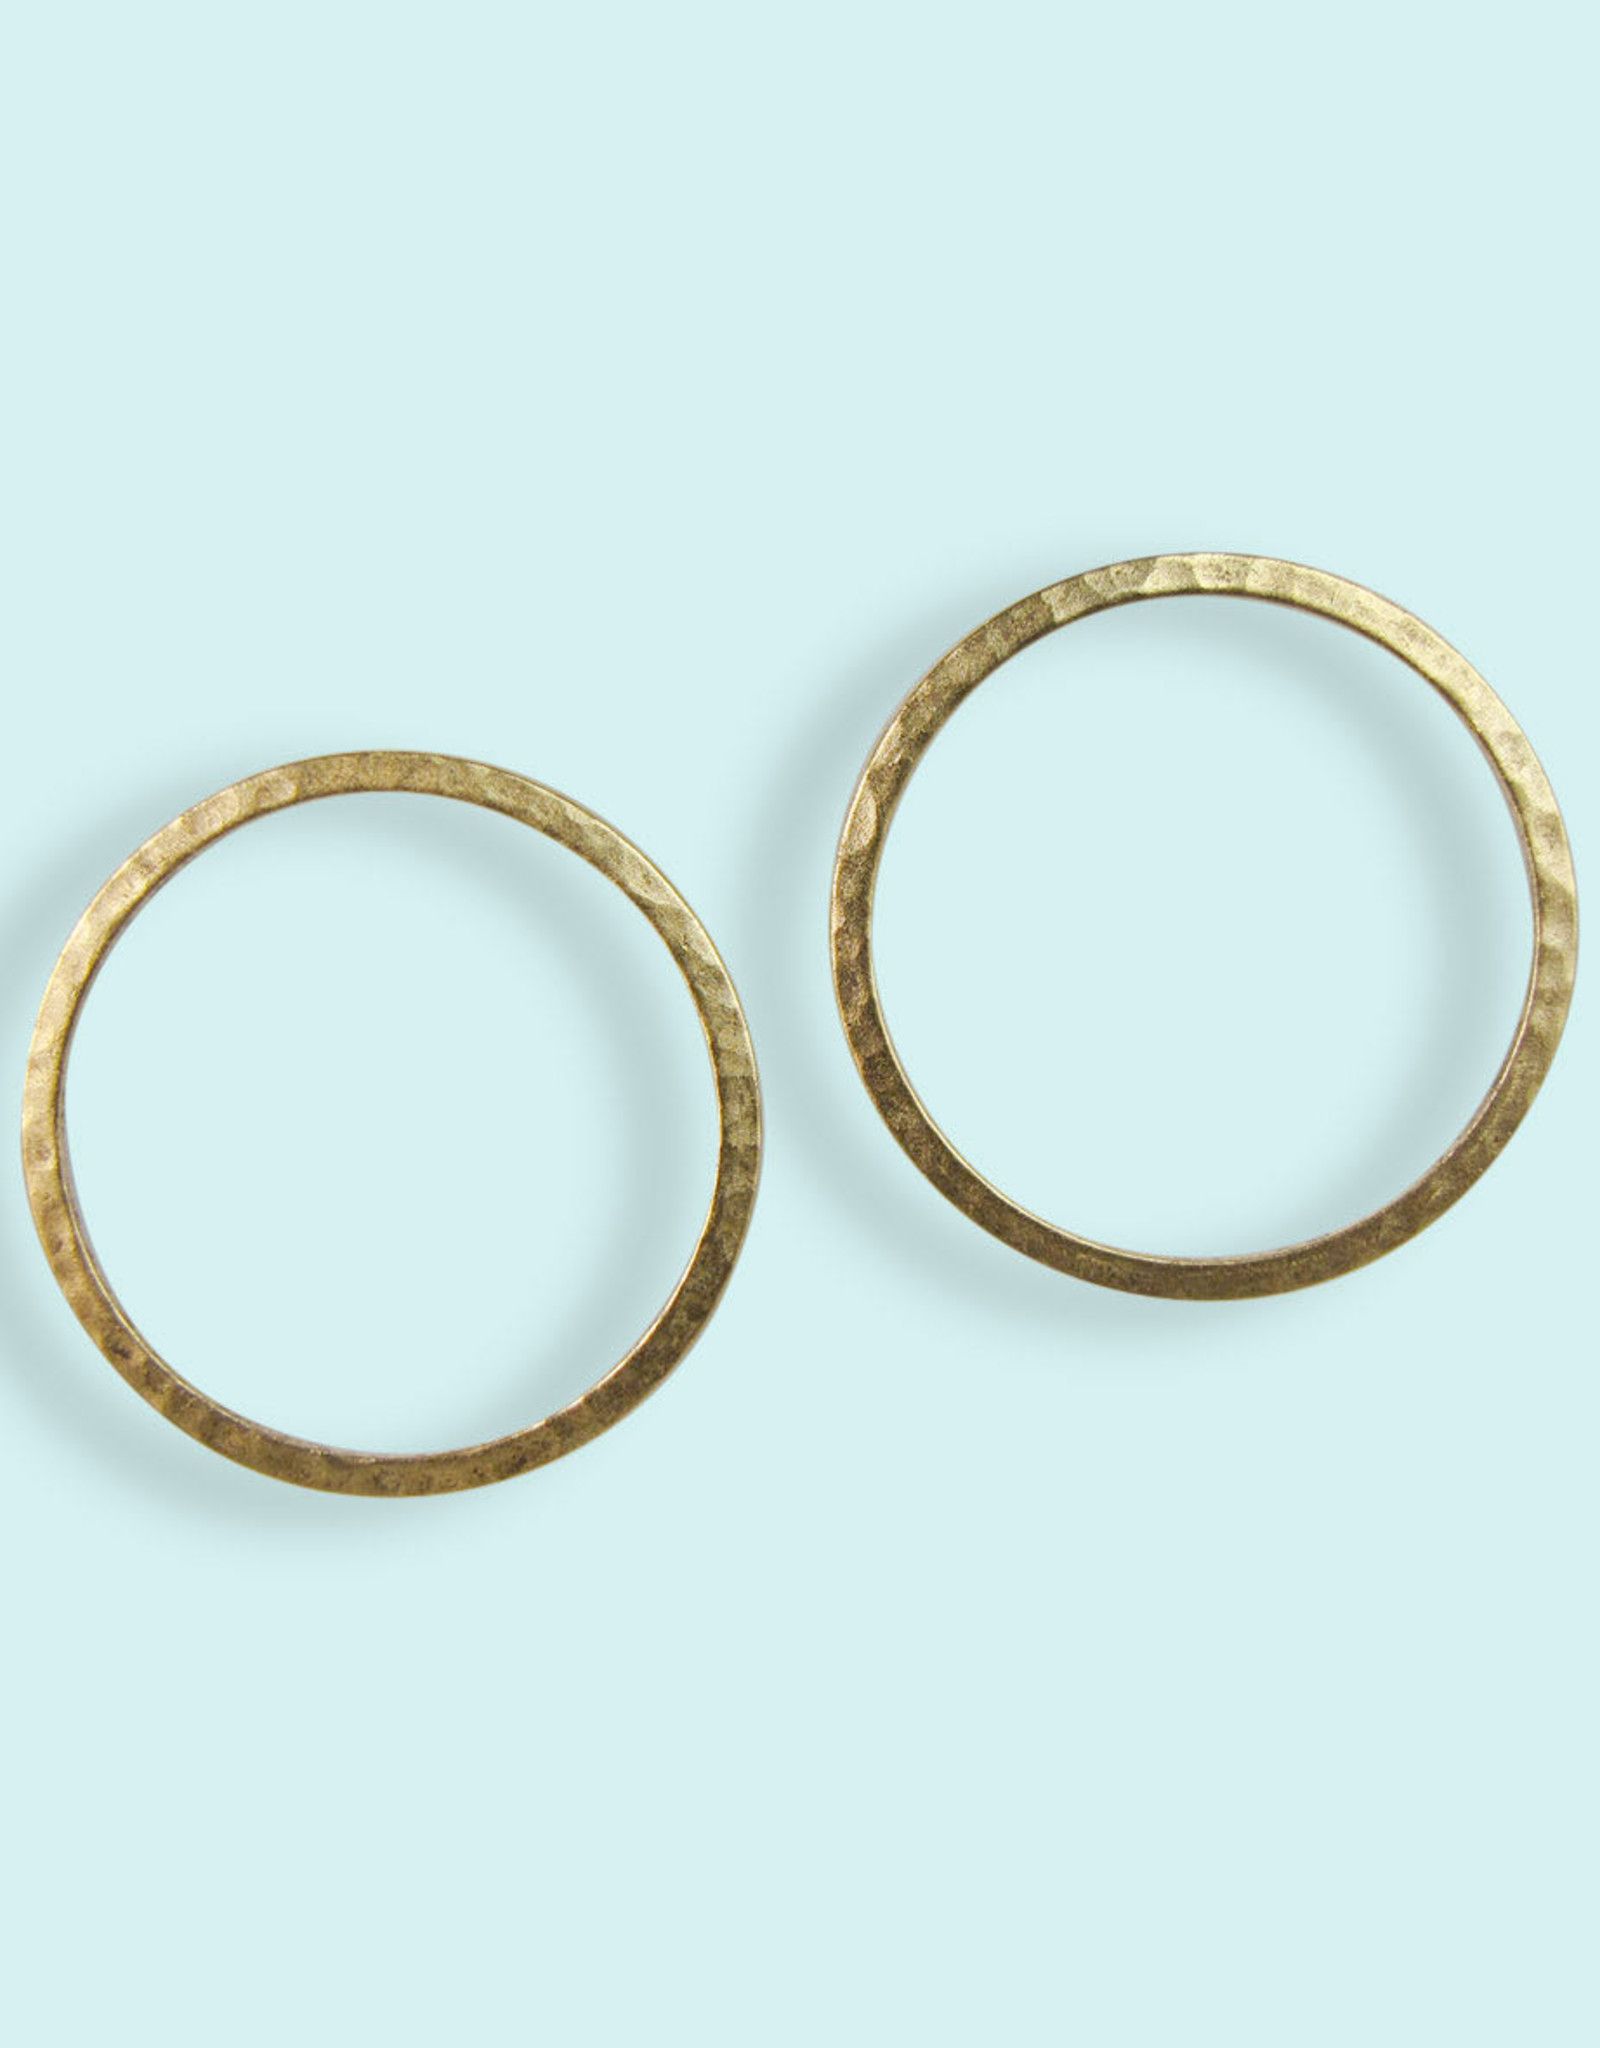 Hammered Circle Earrings 24k Gold Plated